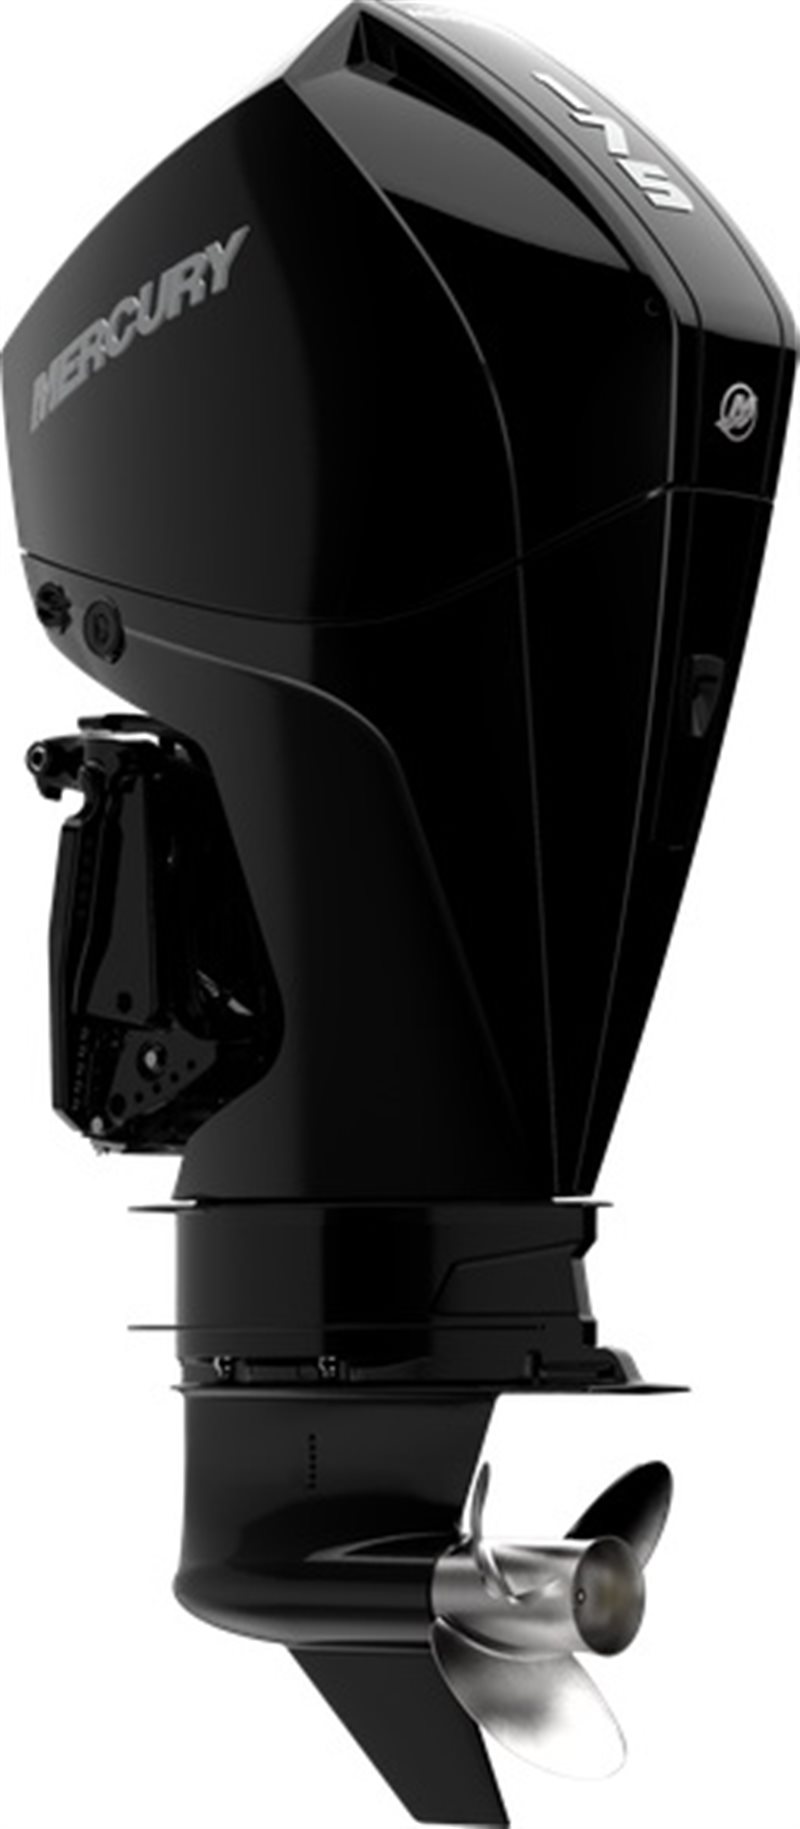 2020 Mercury Outboard Fourstroke 175 - 300 175 HP at Fort Fremont Marine